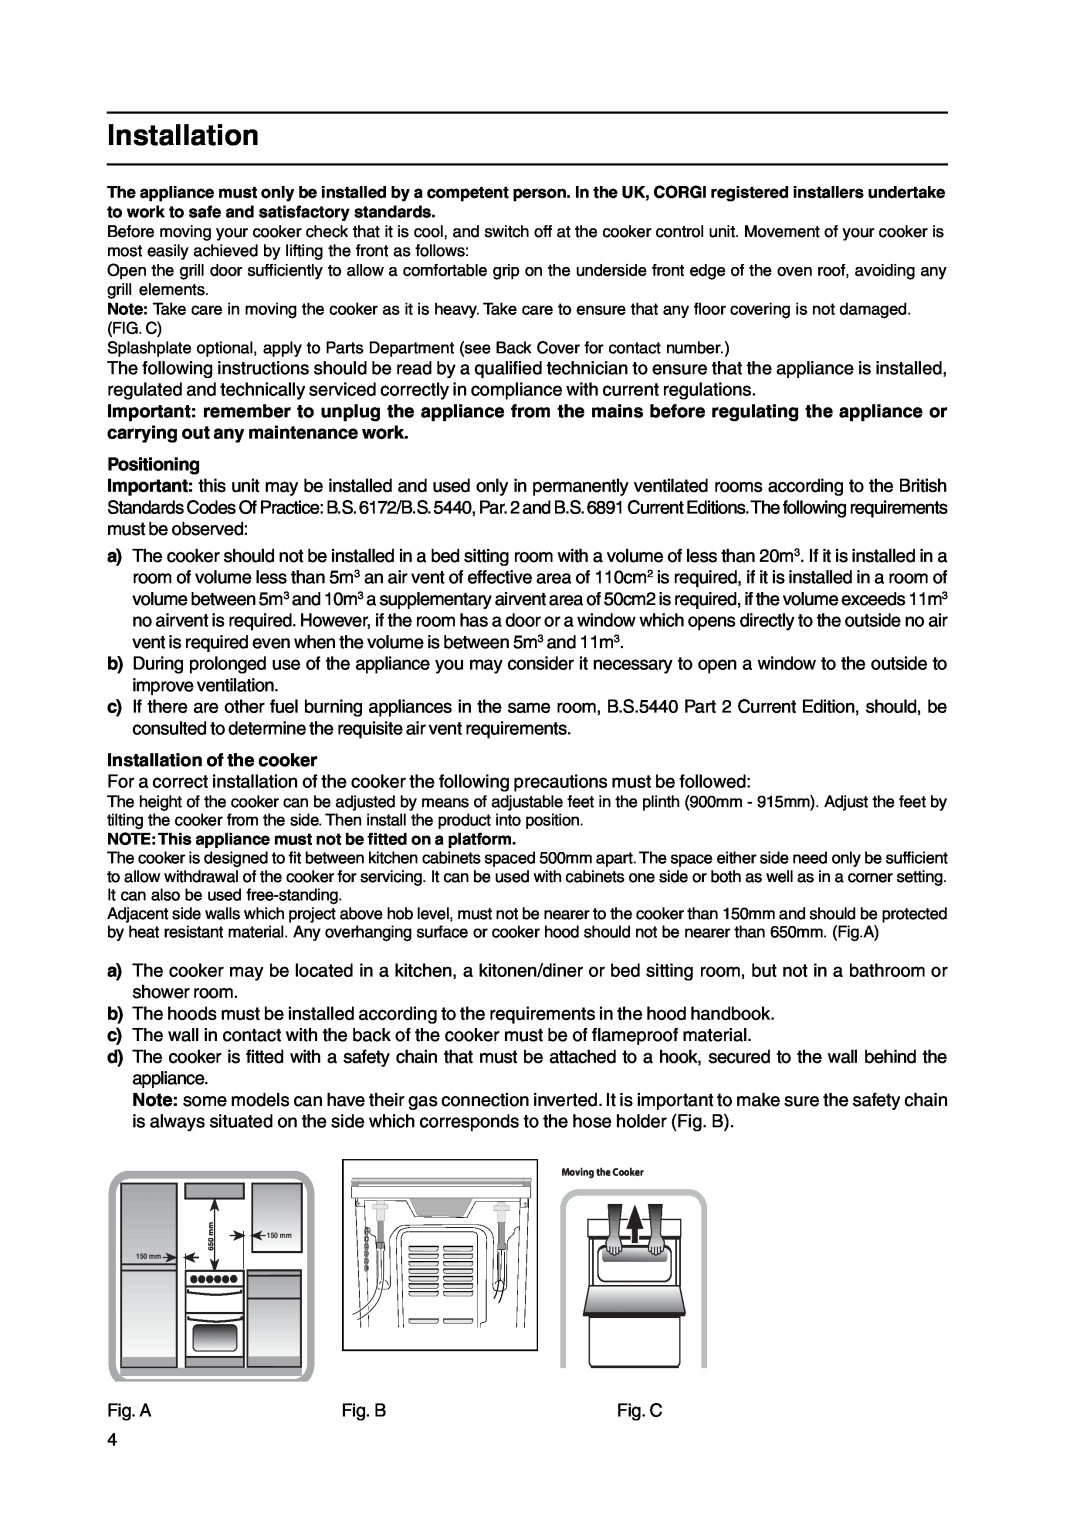 Cannon C110DPX manual Positioning, Installation of the cooker 